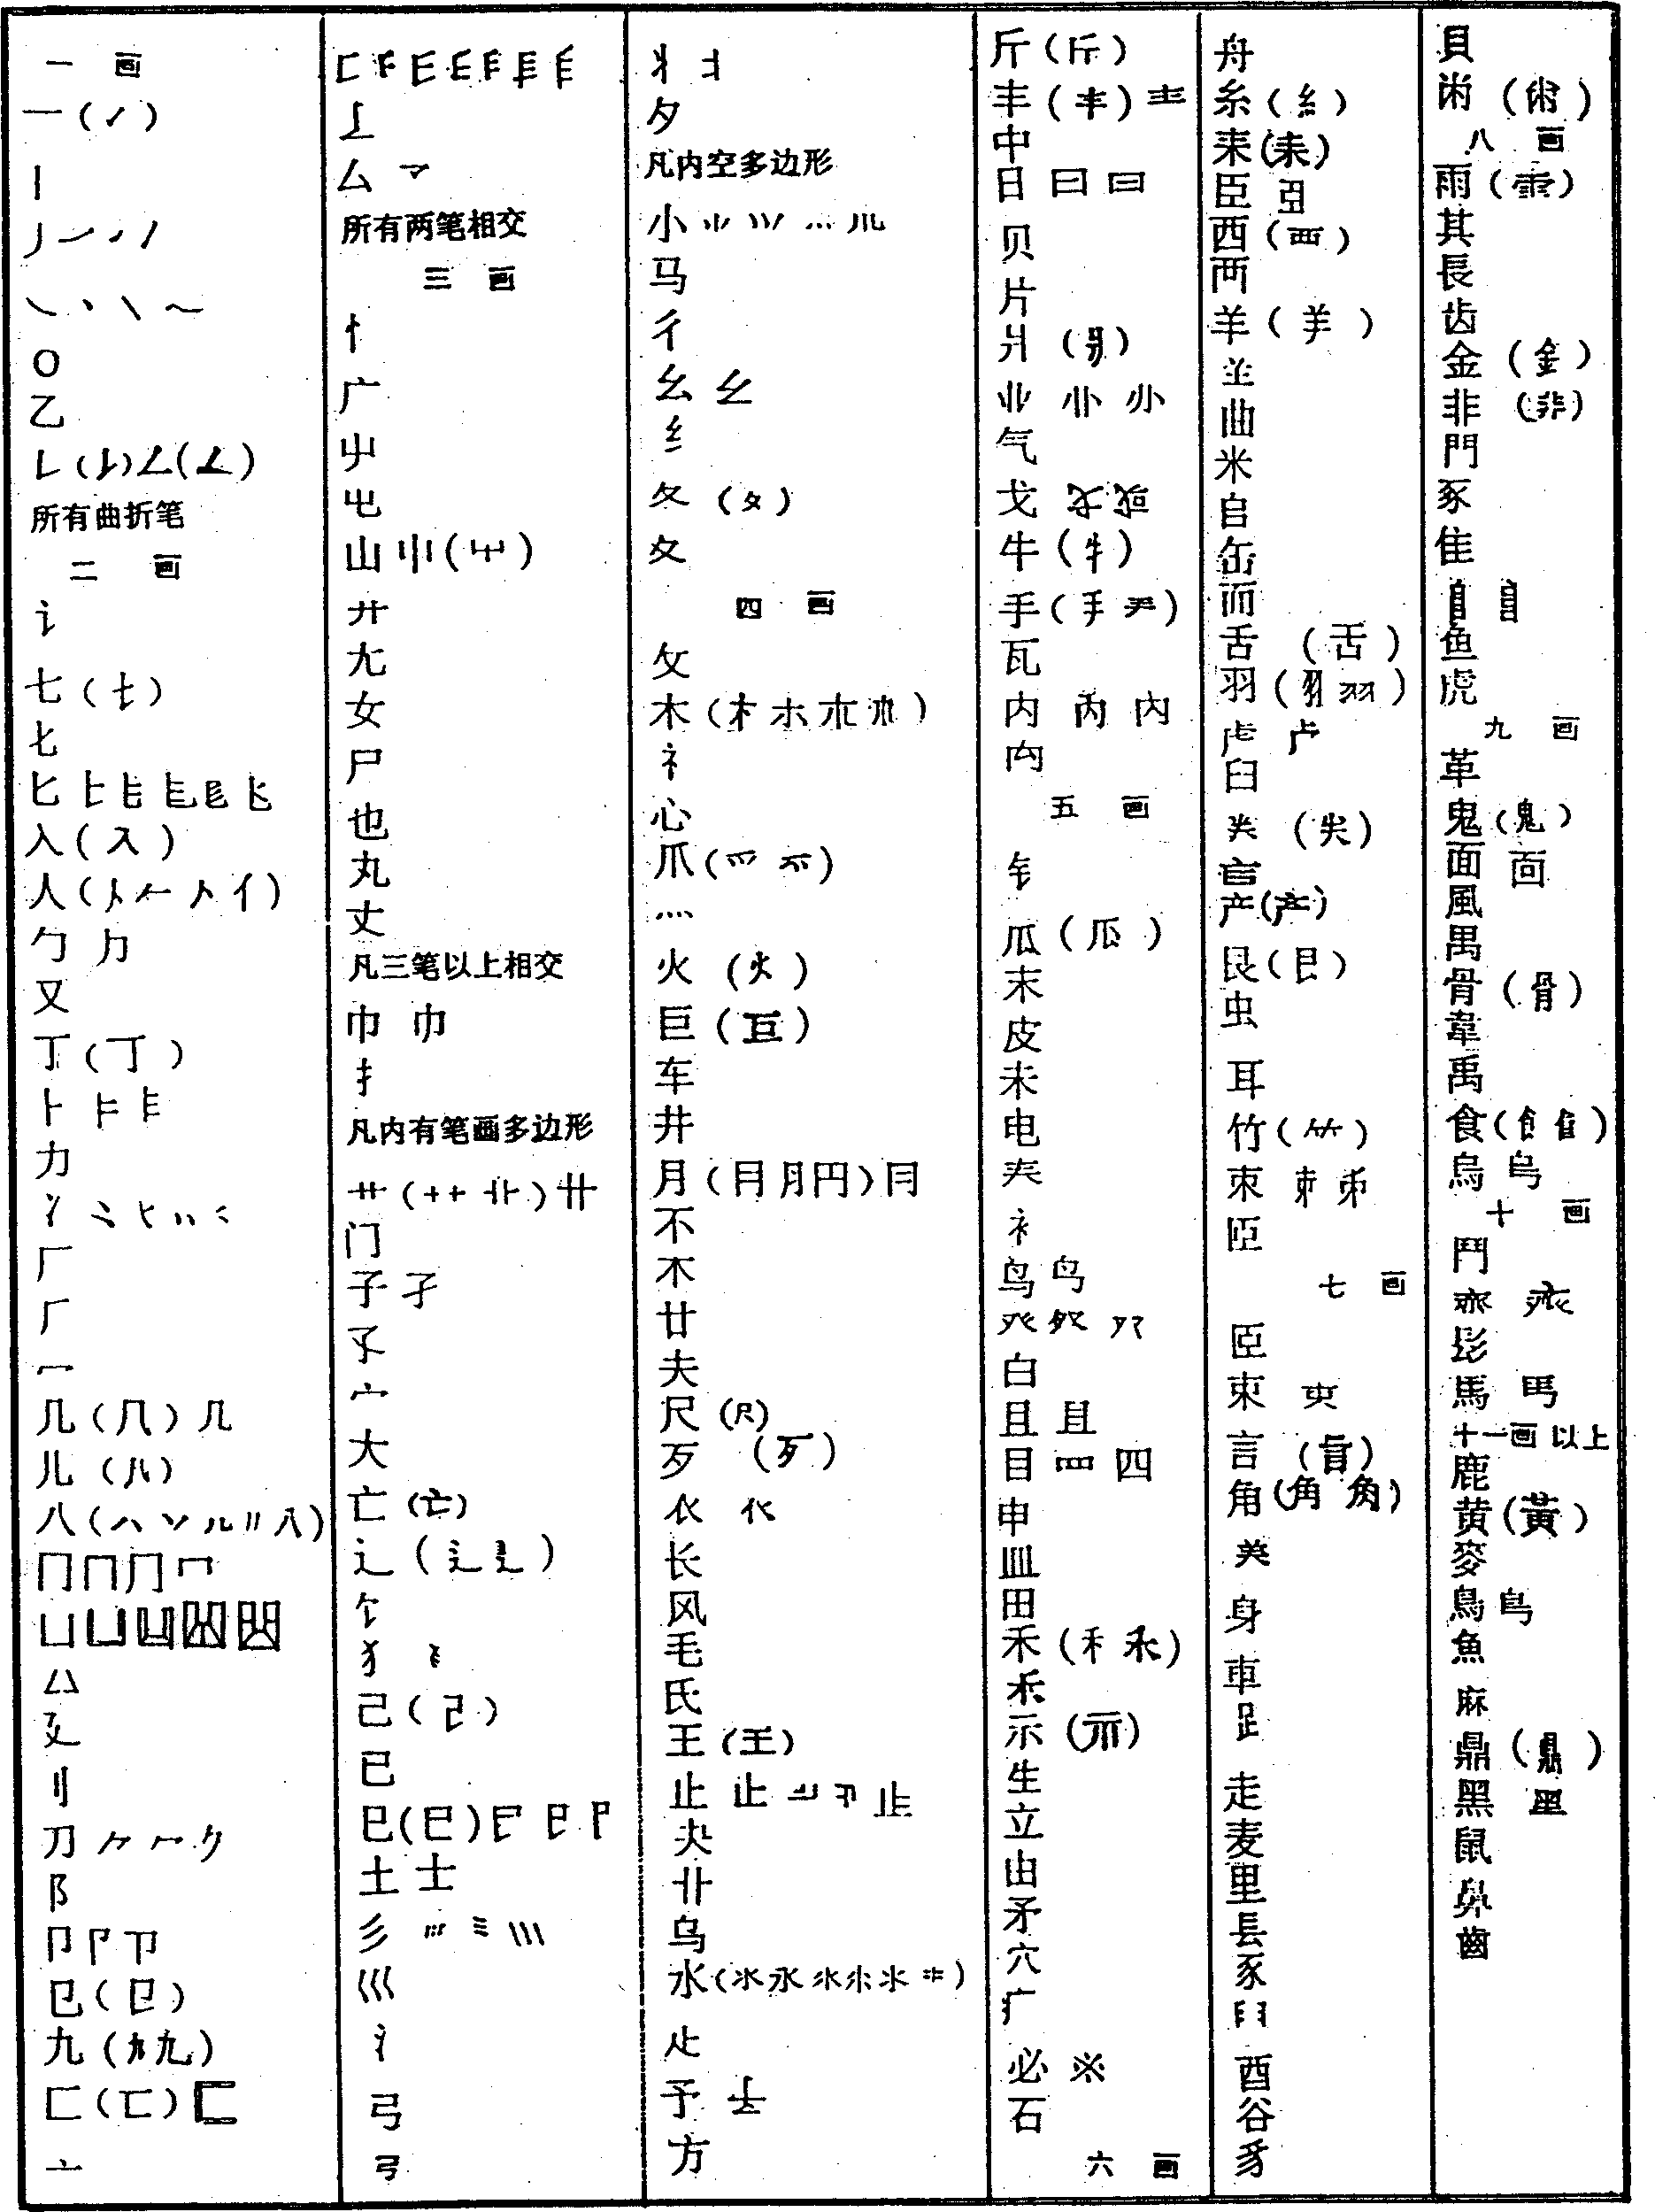 Chinese characters coding method of coordinates codes and its input keyboards